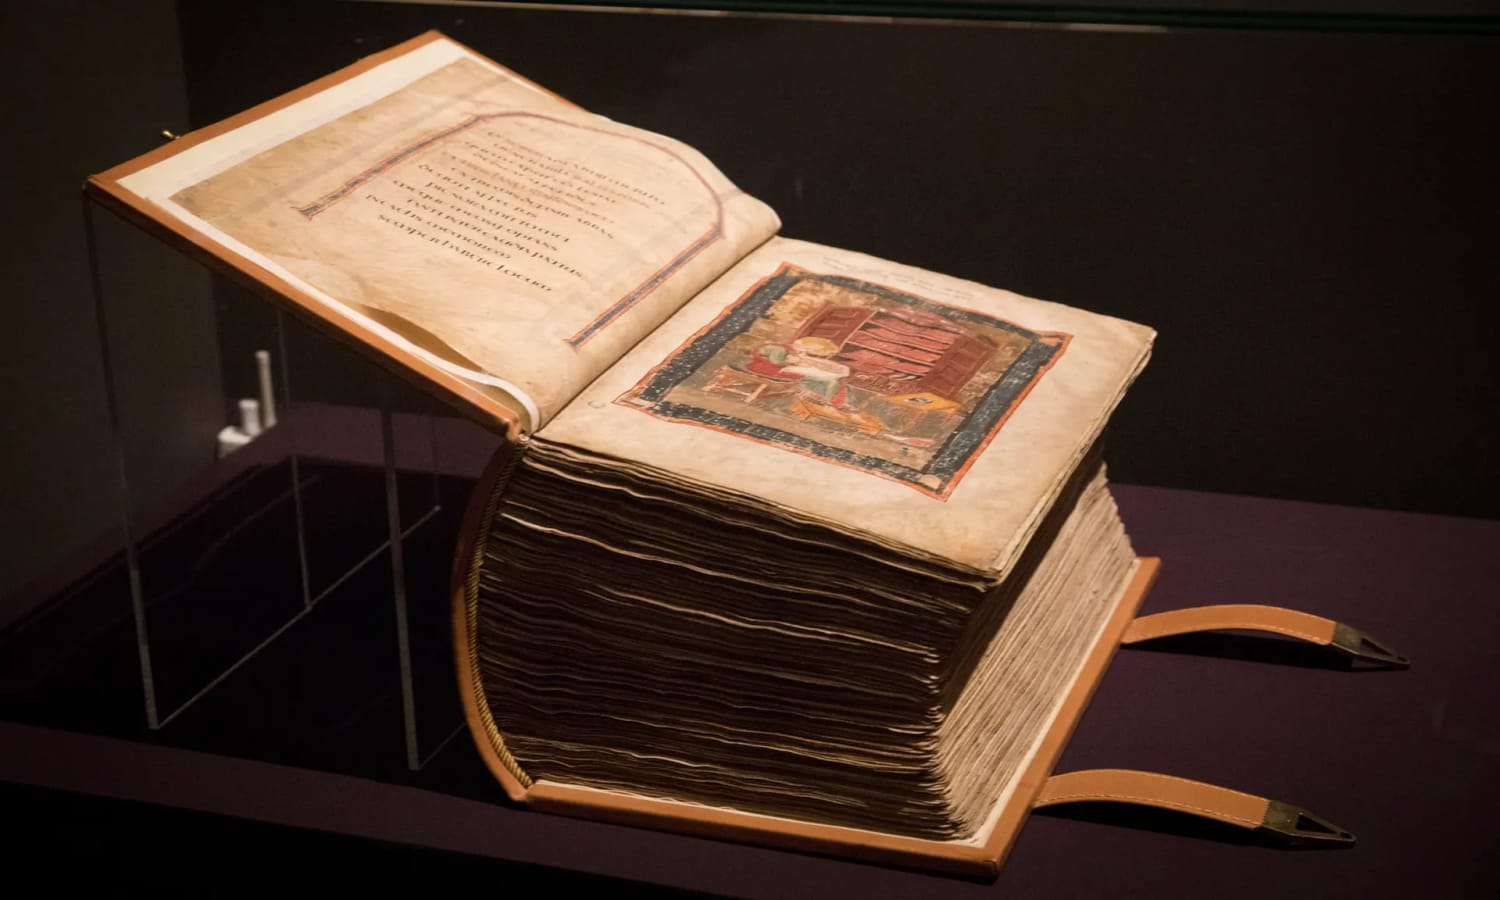 The Codex Amiatinus, an early surviving complete manuscript of the Christian Bible produced around the year 700 AD in the Anglo-Saxon Kingdom of Northumbria. Gifted to Pope Gregory II in 716, it now belongs to the Laurentian Library in Florence.